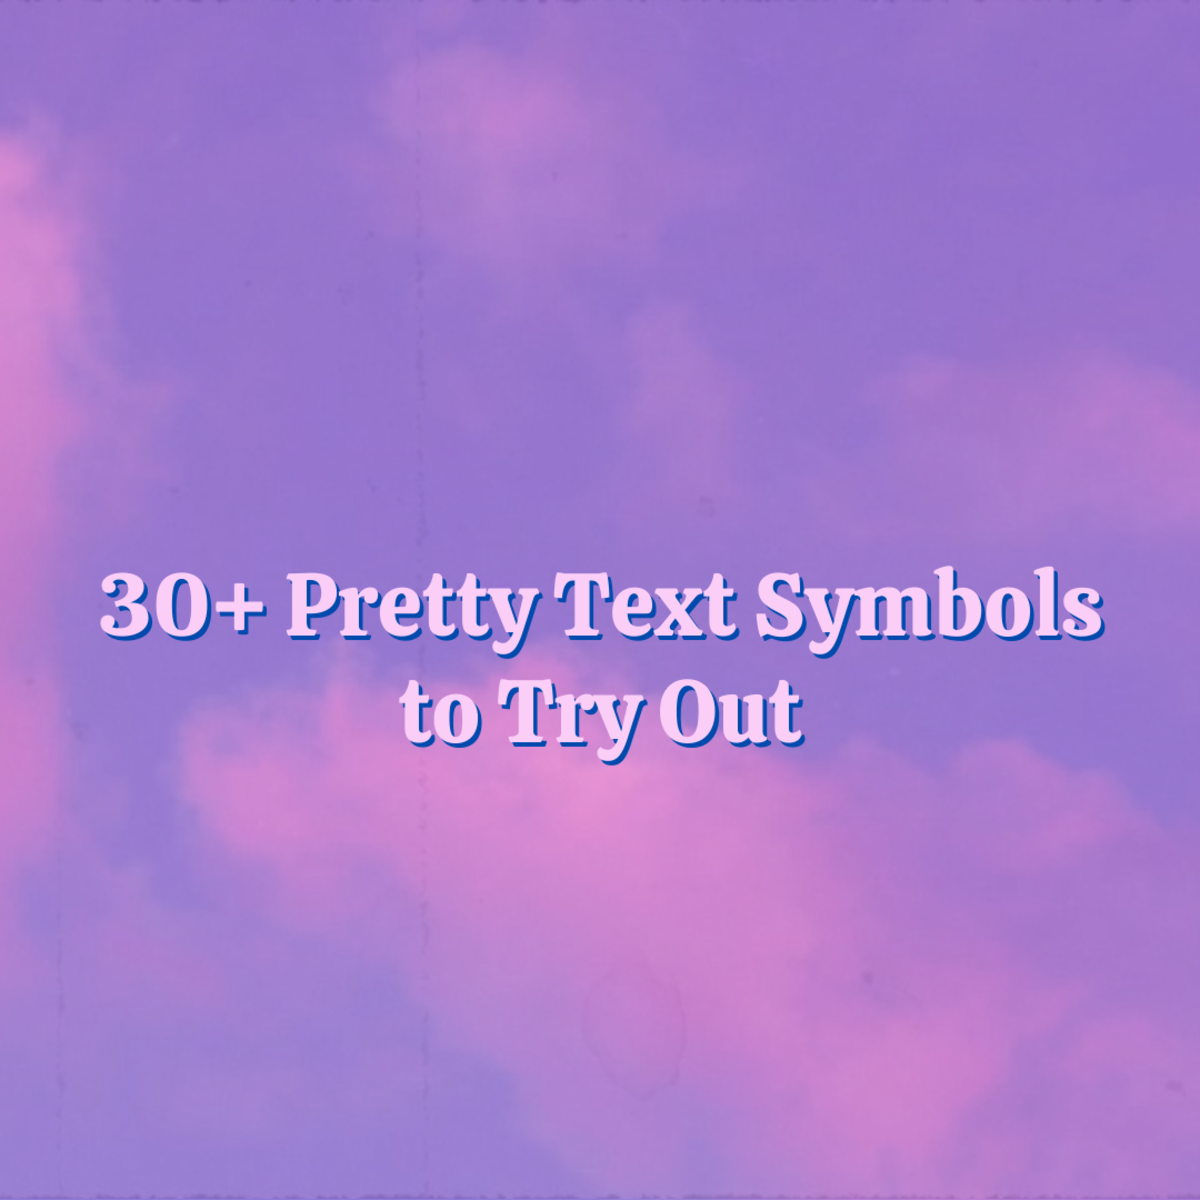 30+ Pretty Symbols and Text Emoticons: The Ultimate List